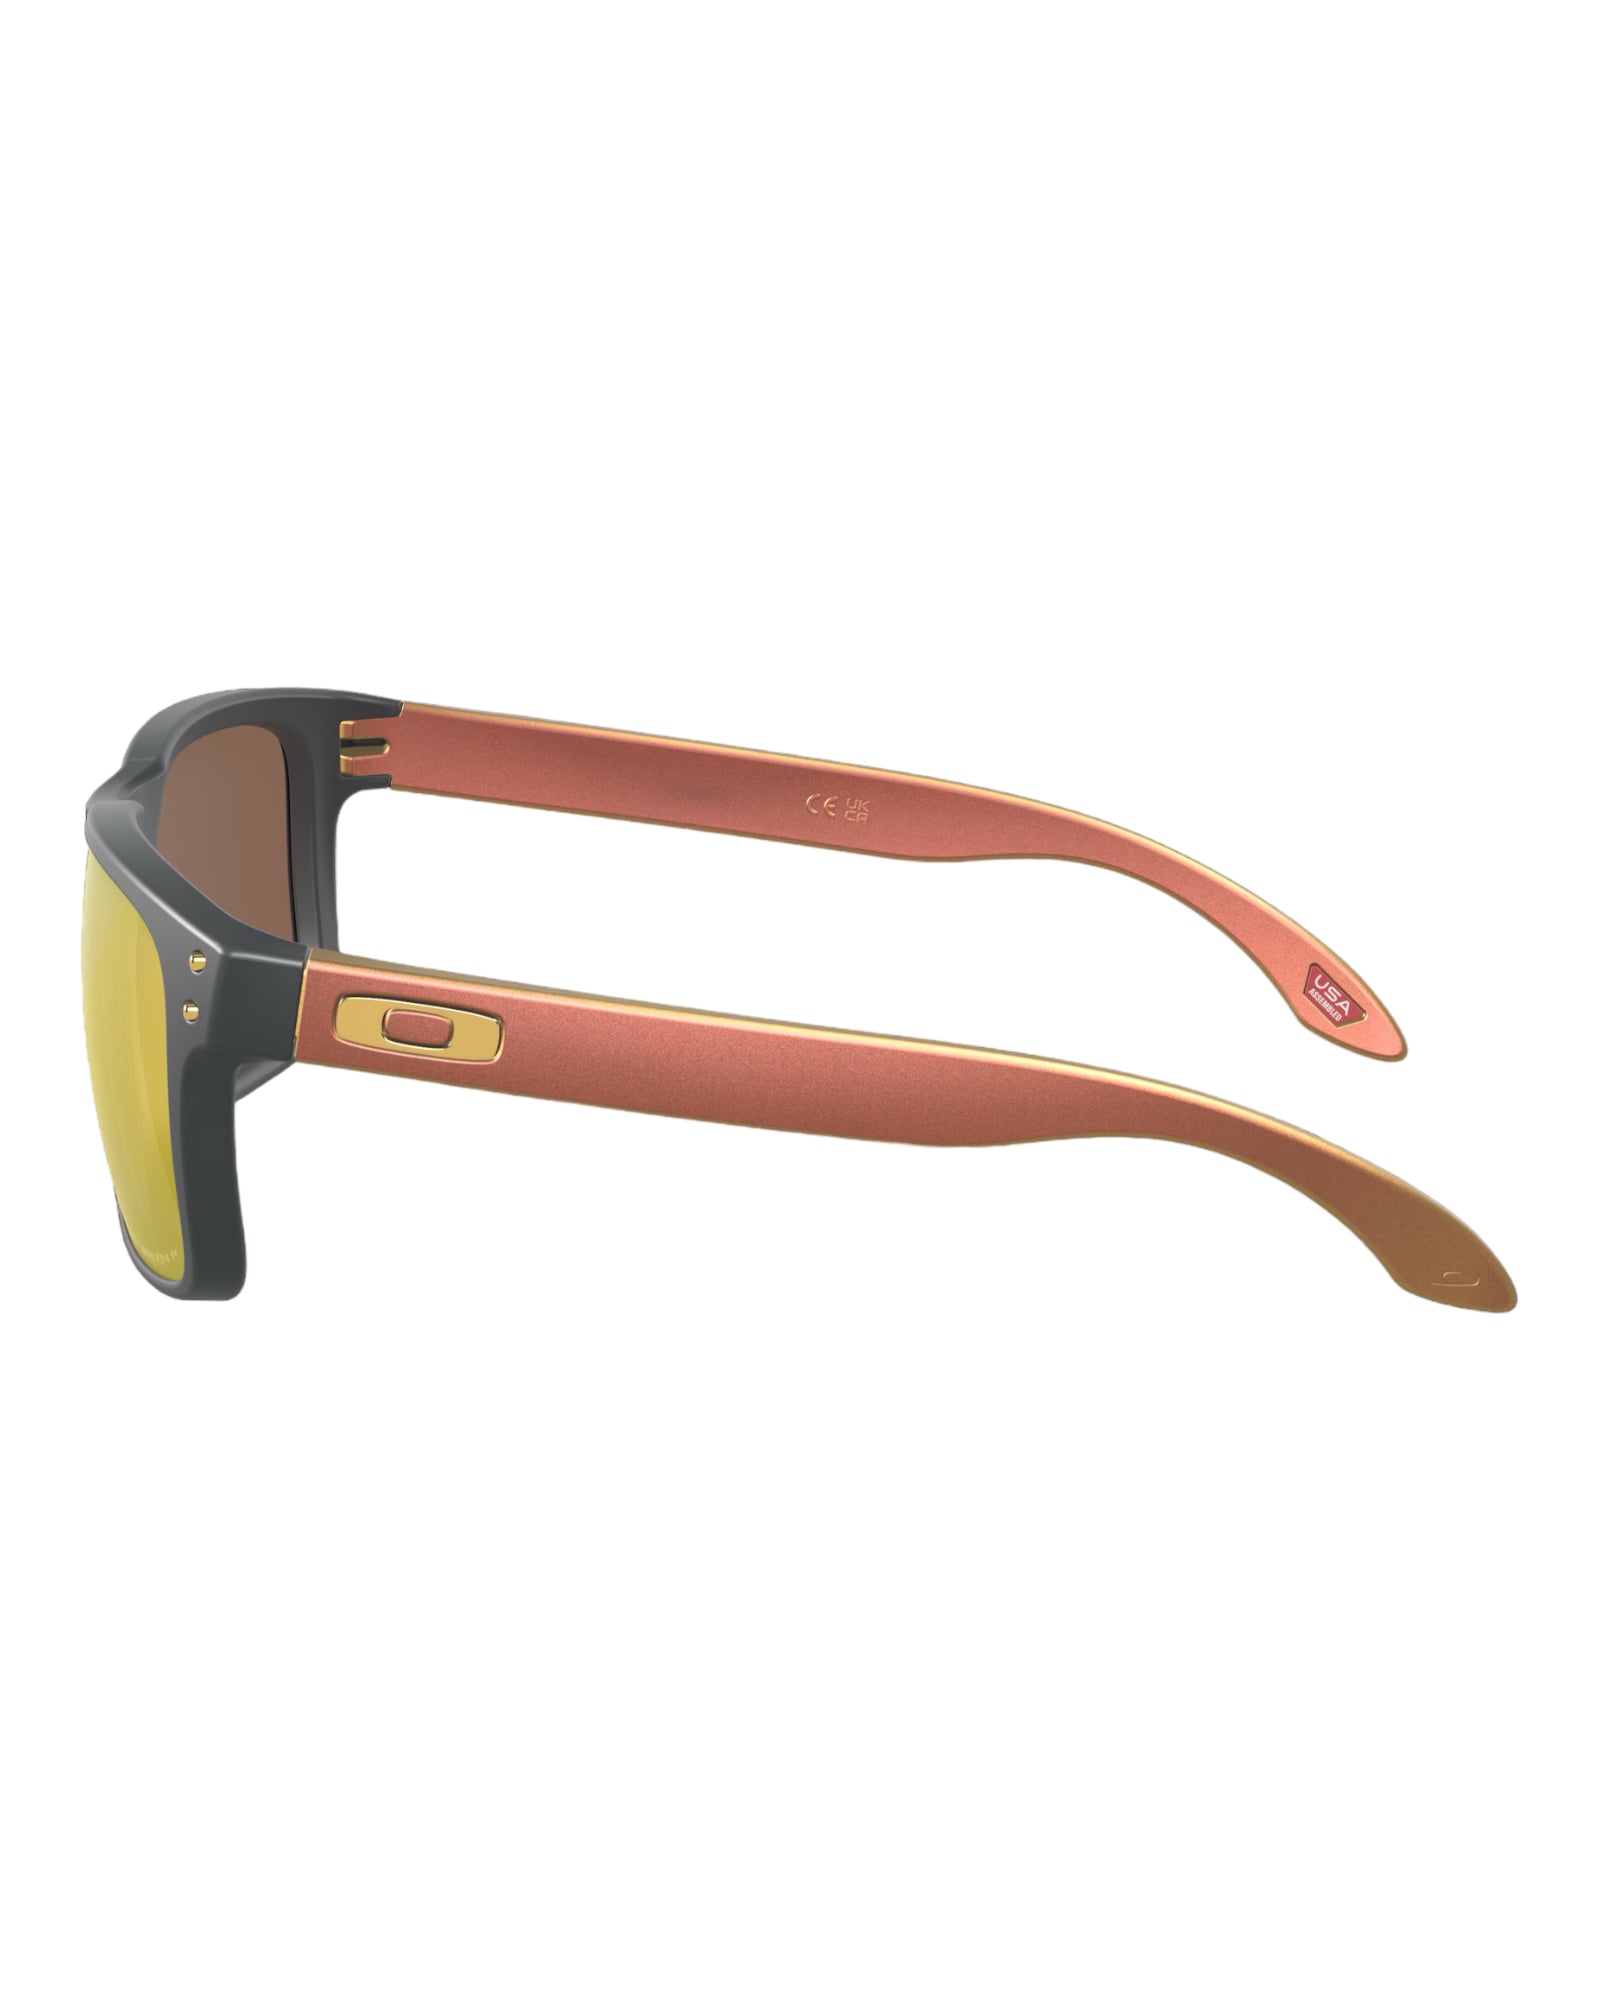 Holbrook is a timeless, classic design fused with modern Oakley technology.